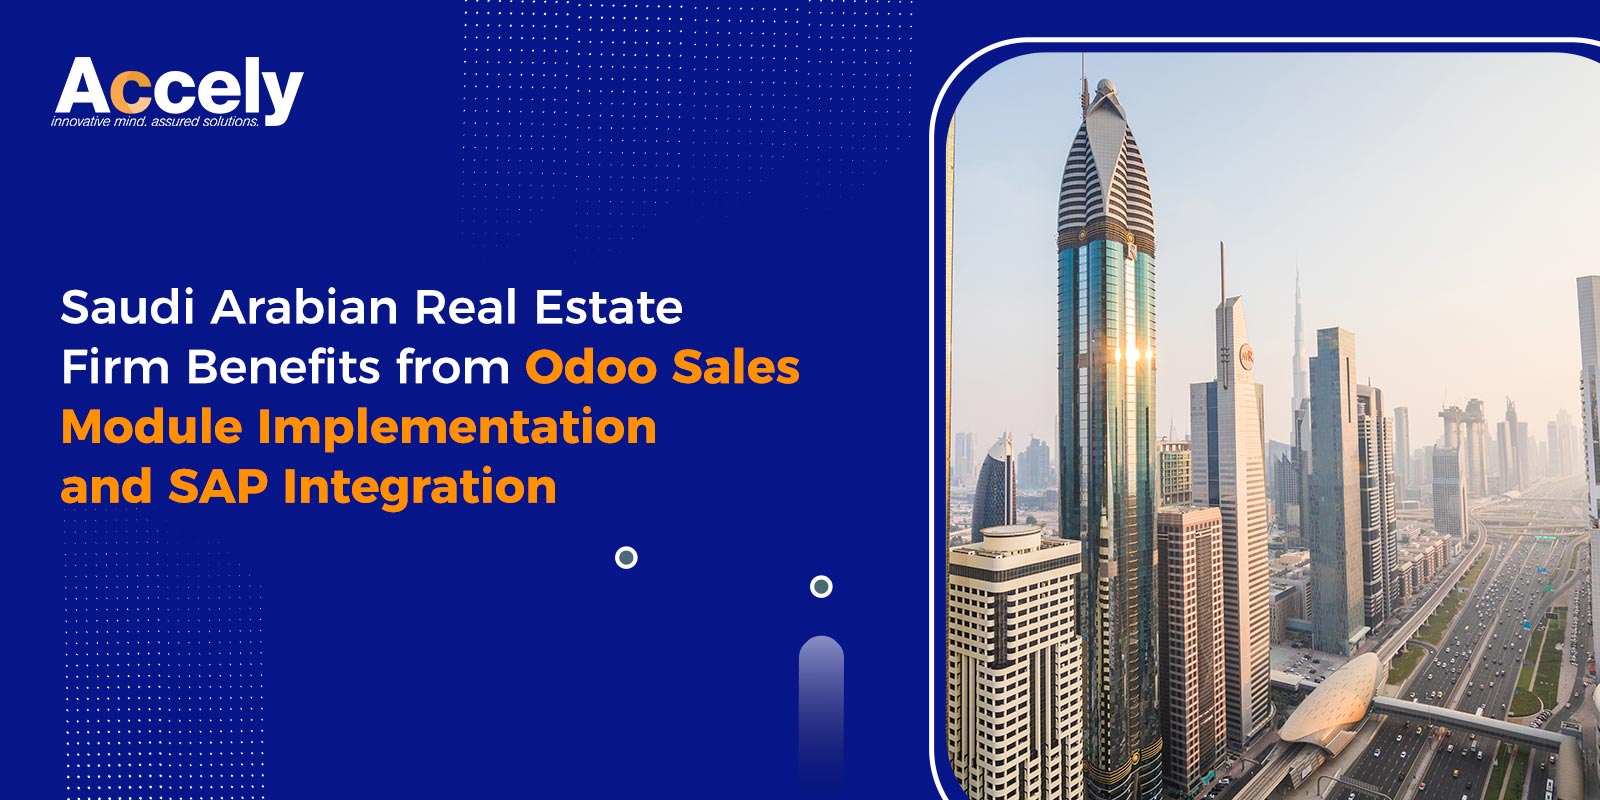 Saudi Arabian Real Estate Firm Benefits from Odoo Sales Module Implementation and SAP Integration